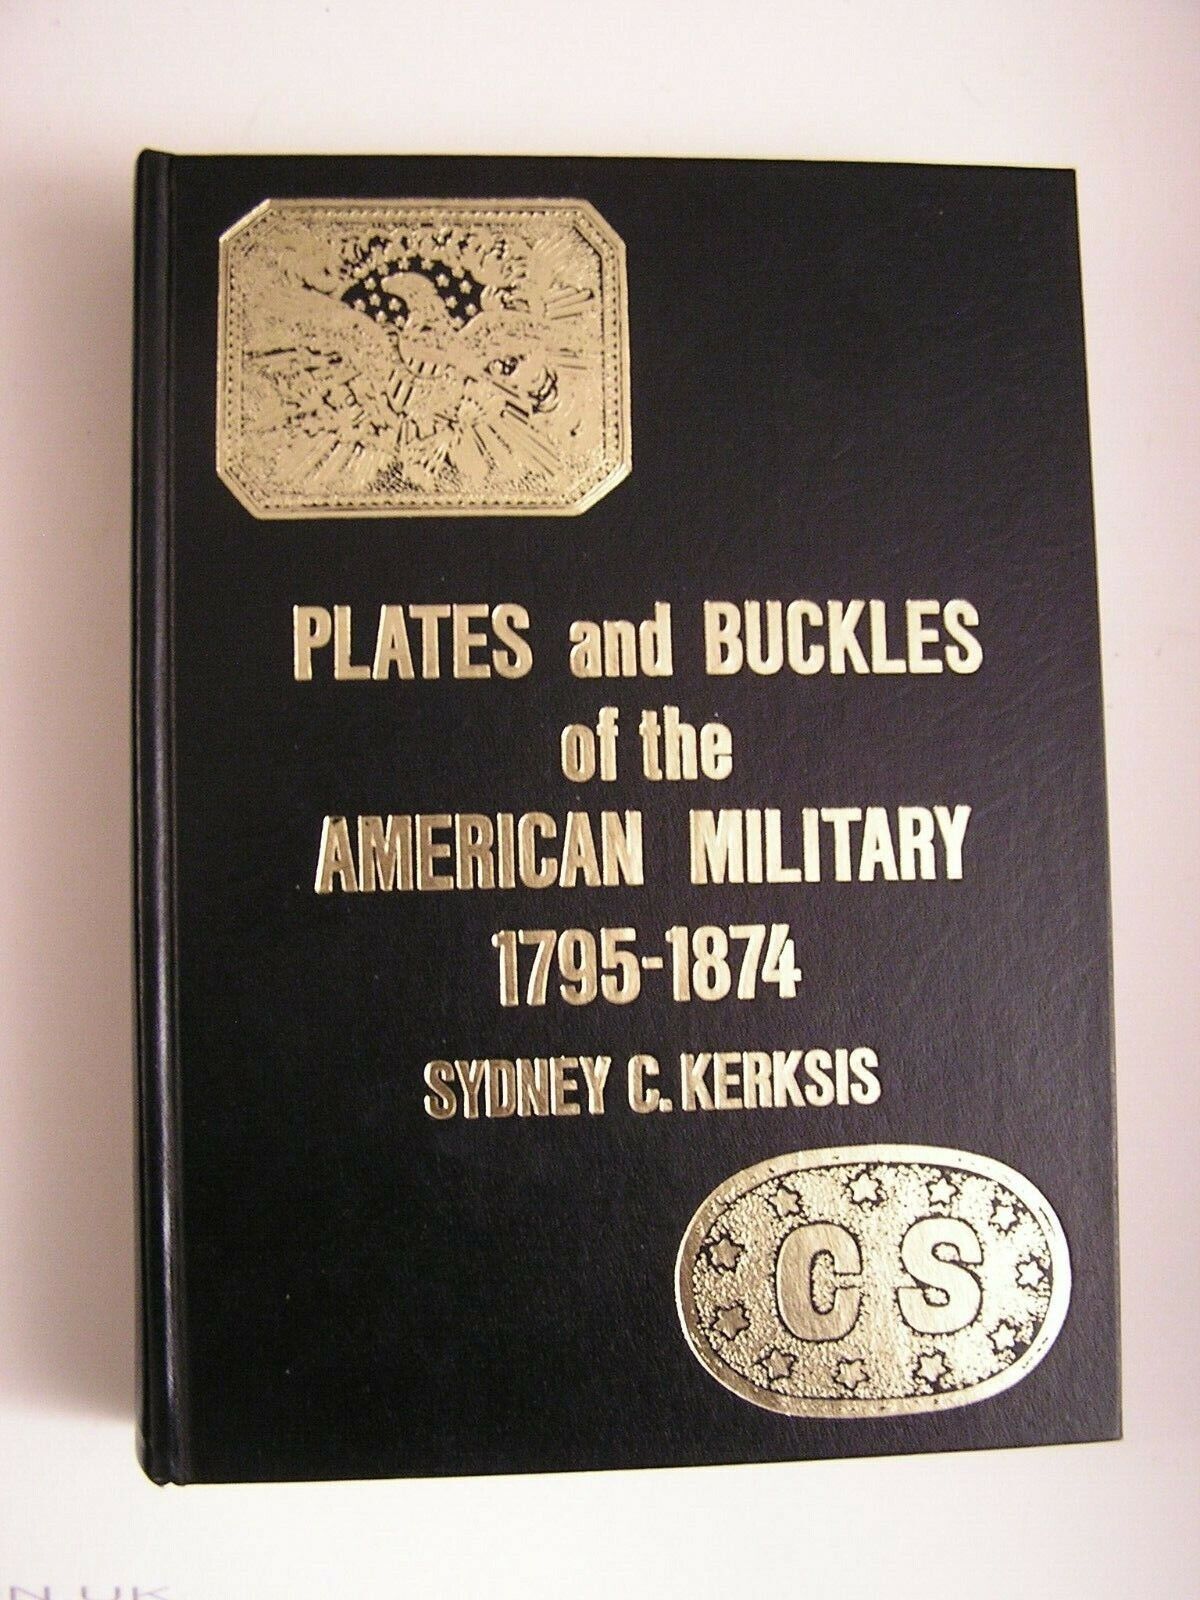 PLATES AND BUCKLES OF THE AMERICAN MILITARY 1795-1874 Revolutionary War, Civil W